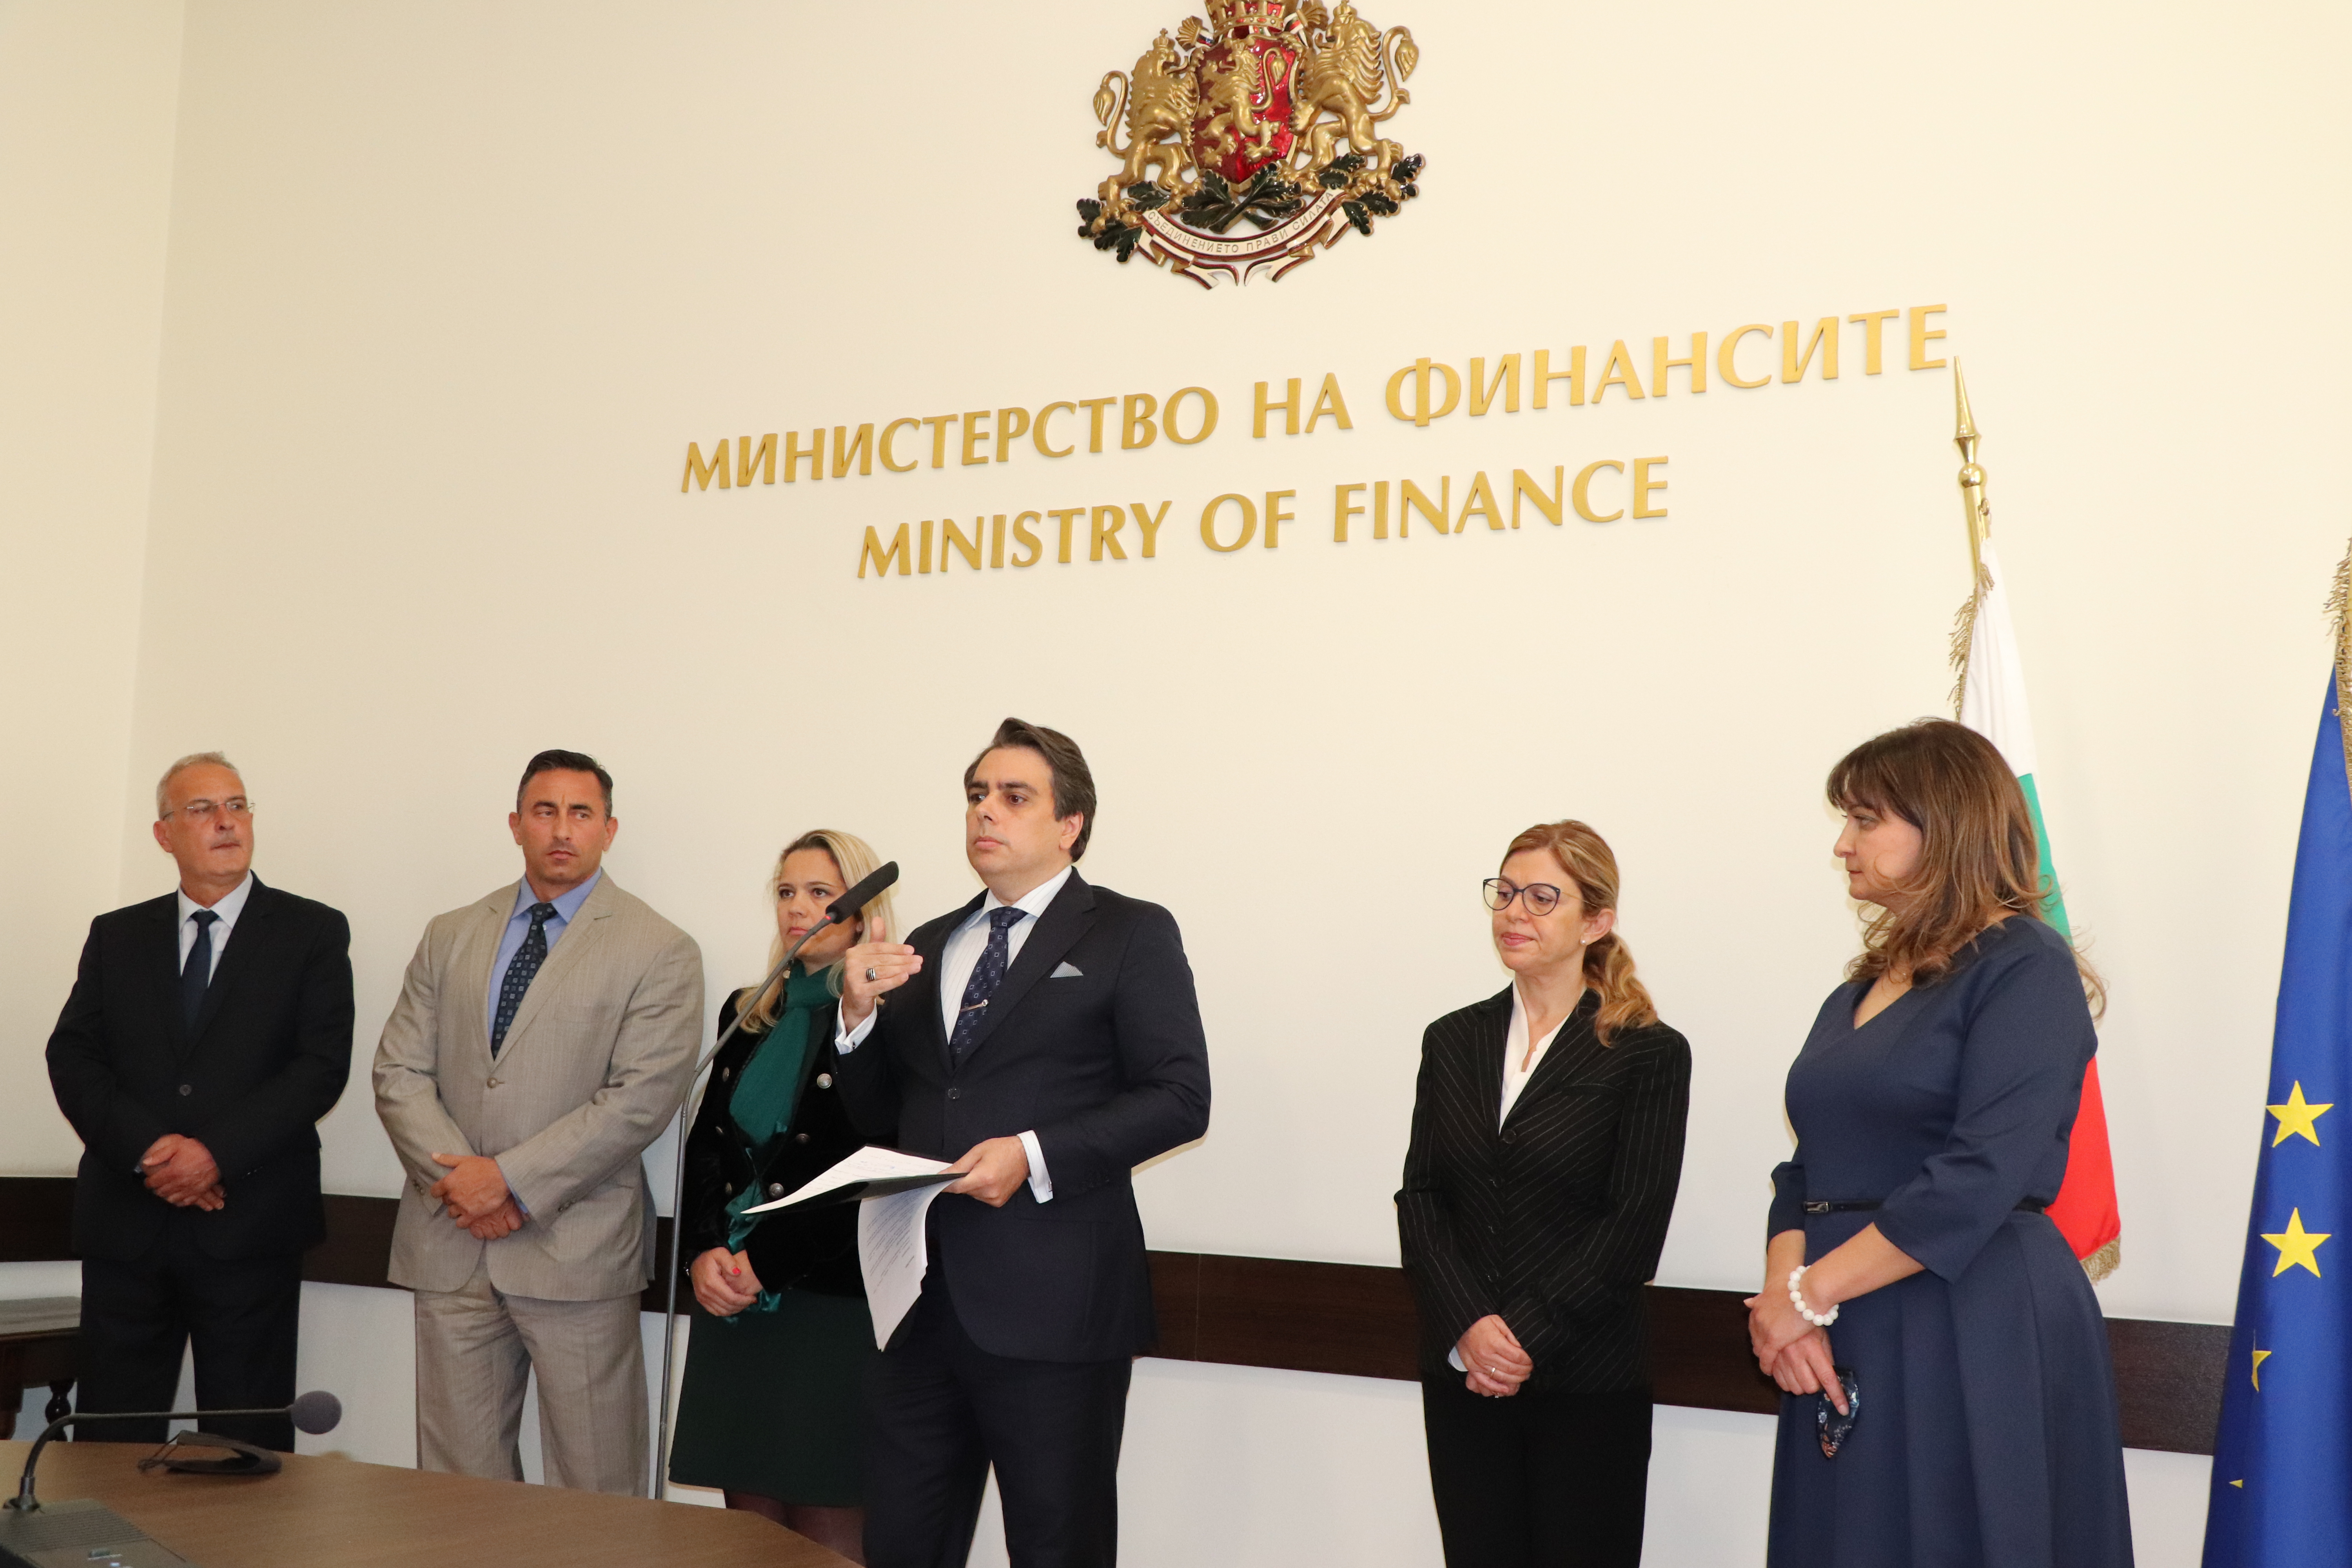 Minister of Finance Assen Vassilev presented his team and outlined the main priorities in the work of the new management of the revenue agencies